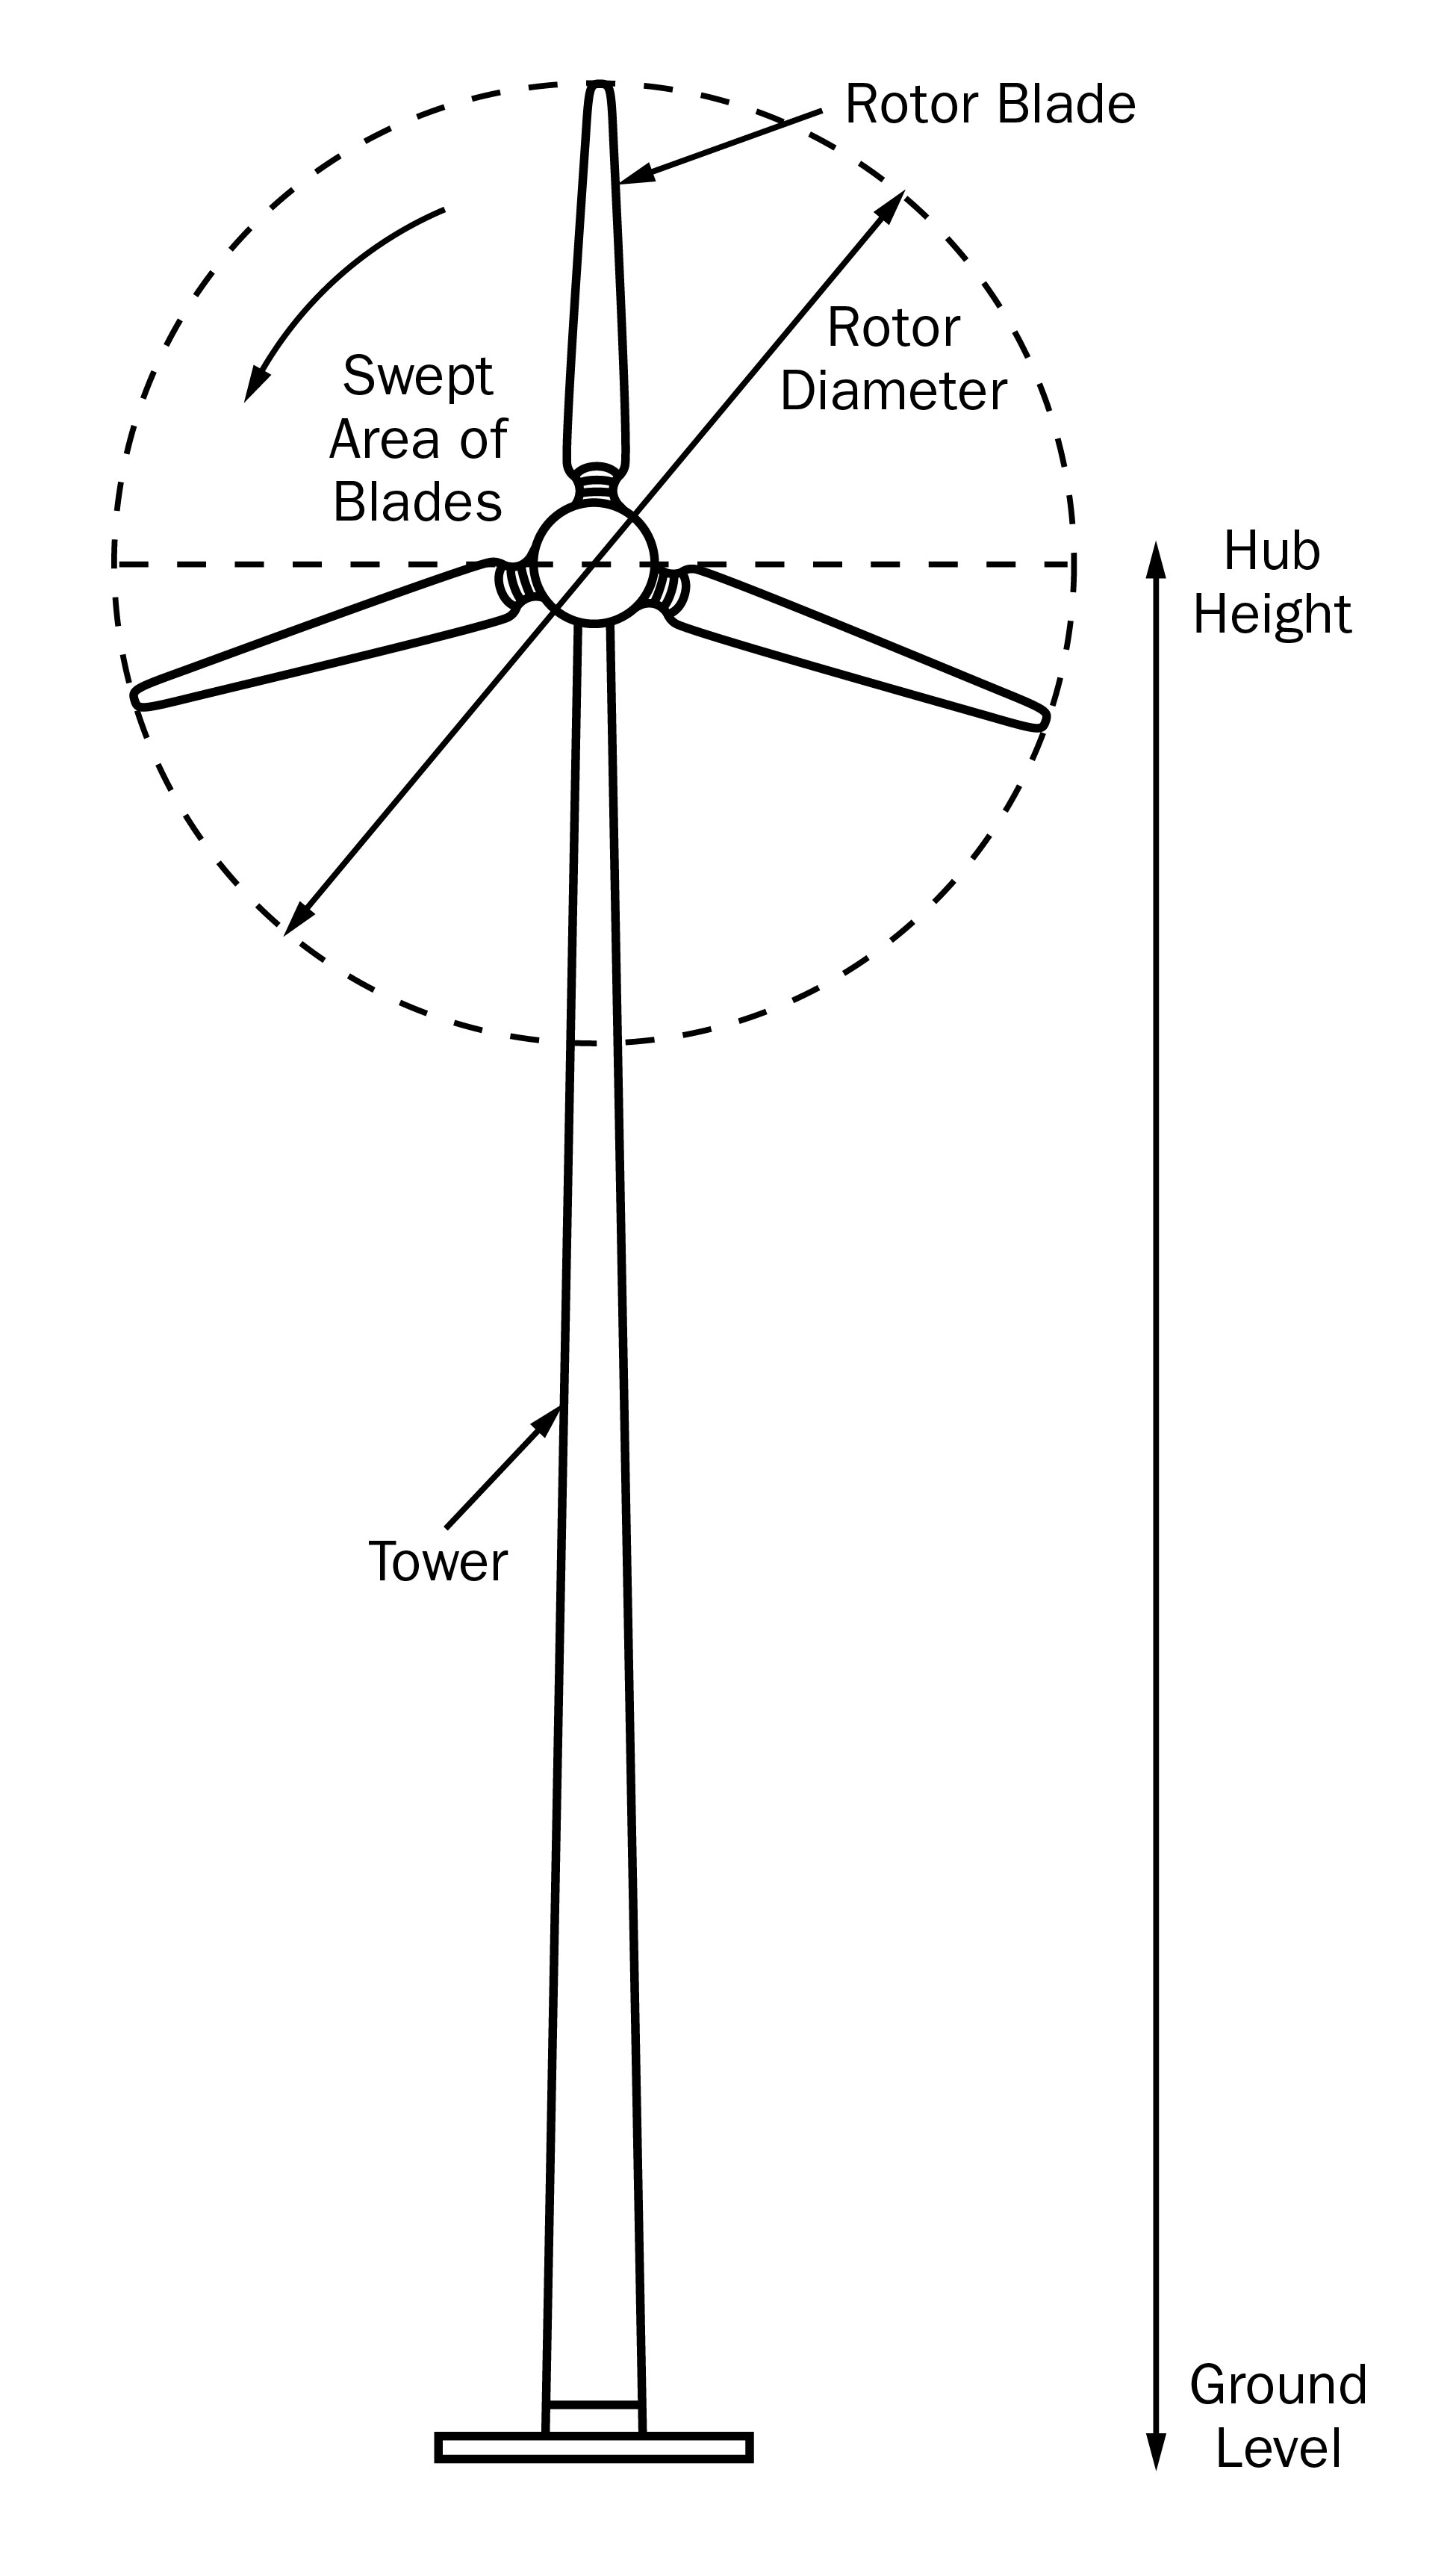 A wind turbine showing its major components and hub height